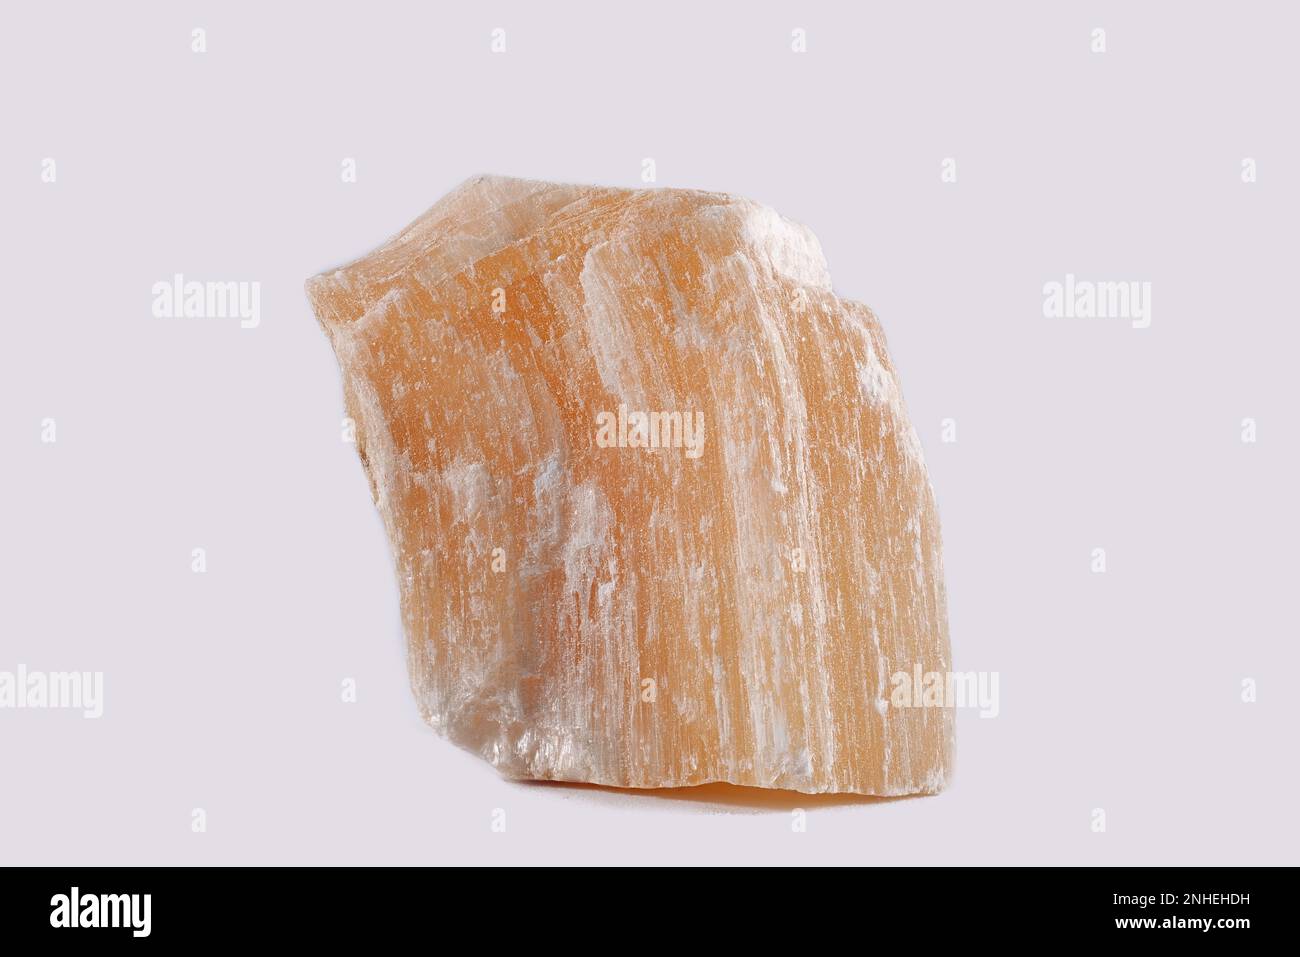 Gypsum is a soft sulfate mineral composed of calcium sulfate dihydrate. It is widely mined and used as a fertilizer. Stock Photo